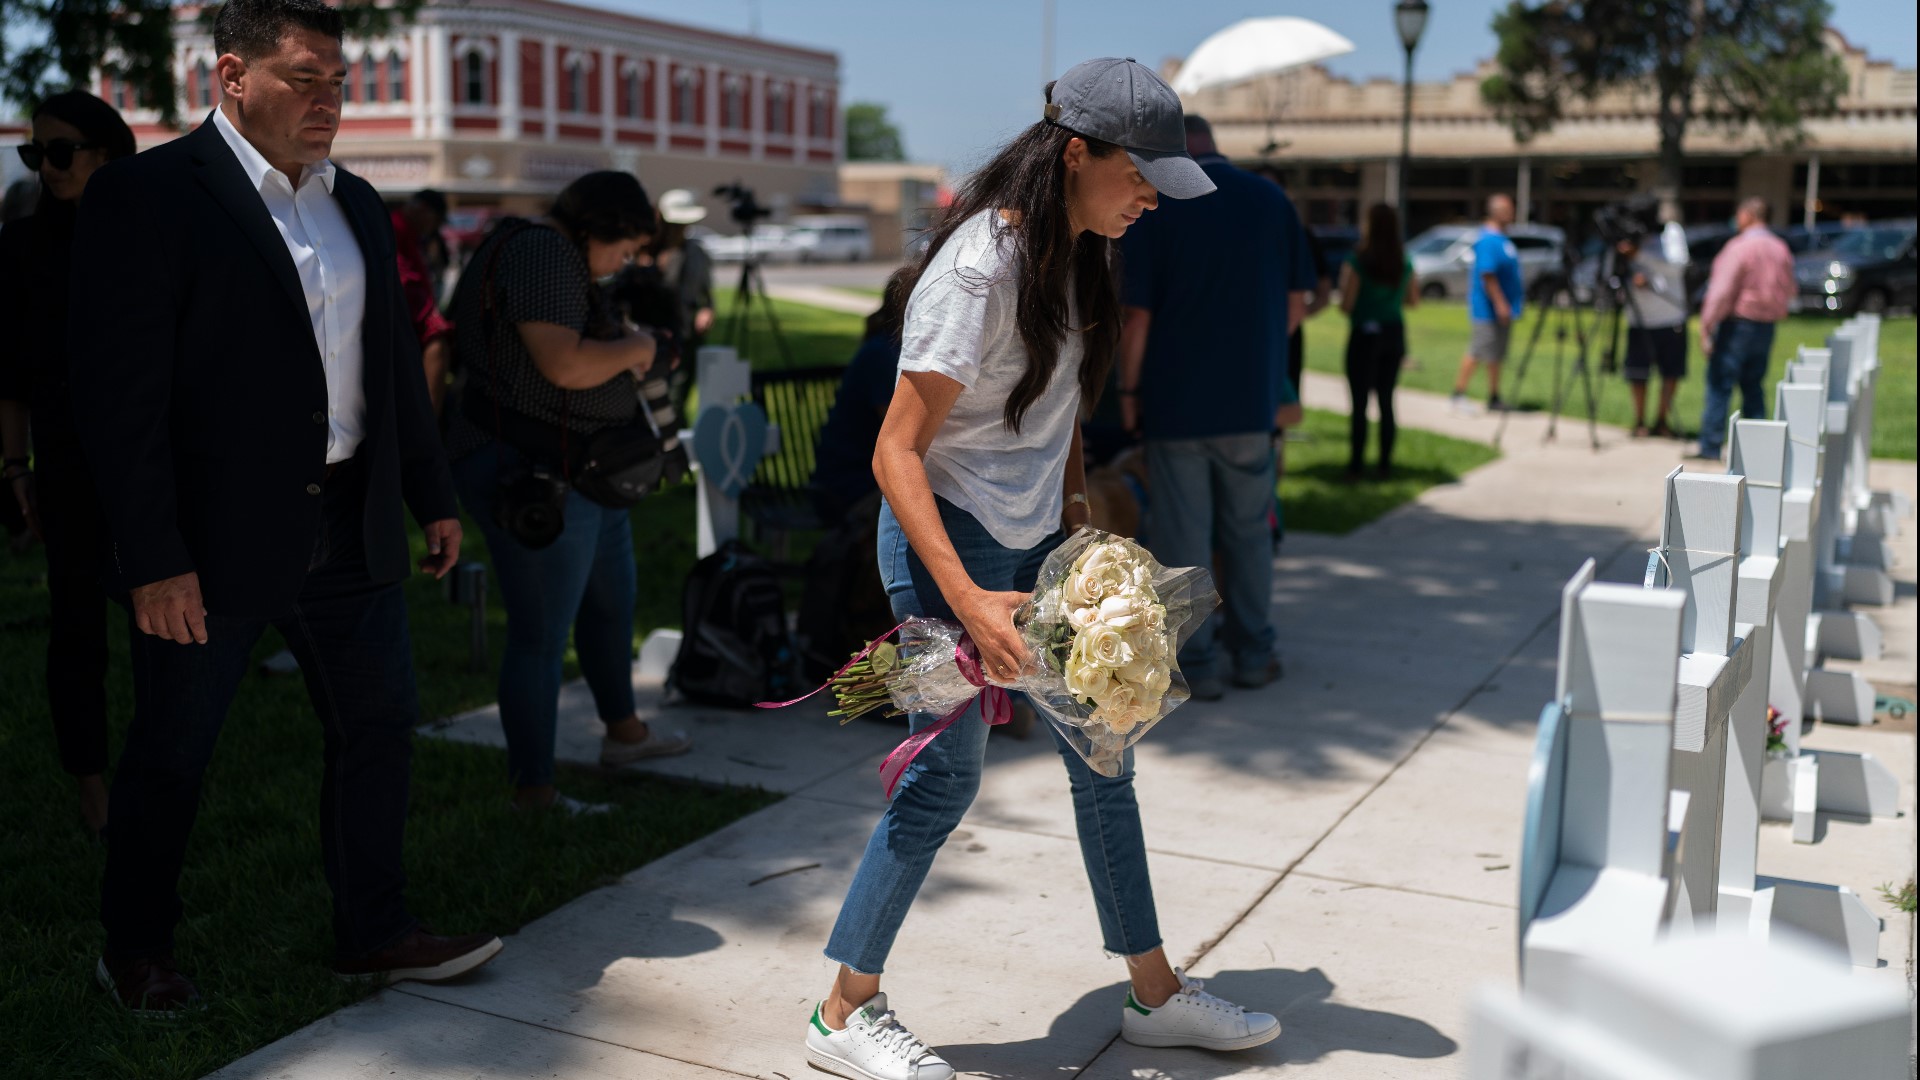 The Duchess of Sussex left flowers at the memorial set up in front of the courthouse in Uvalde, Texas.